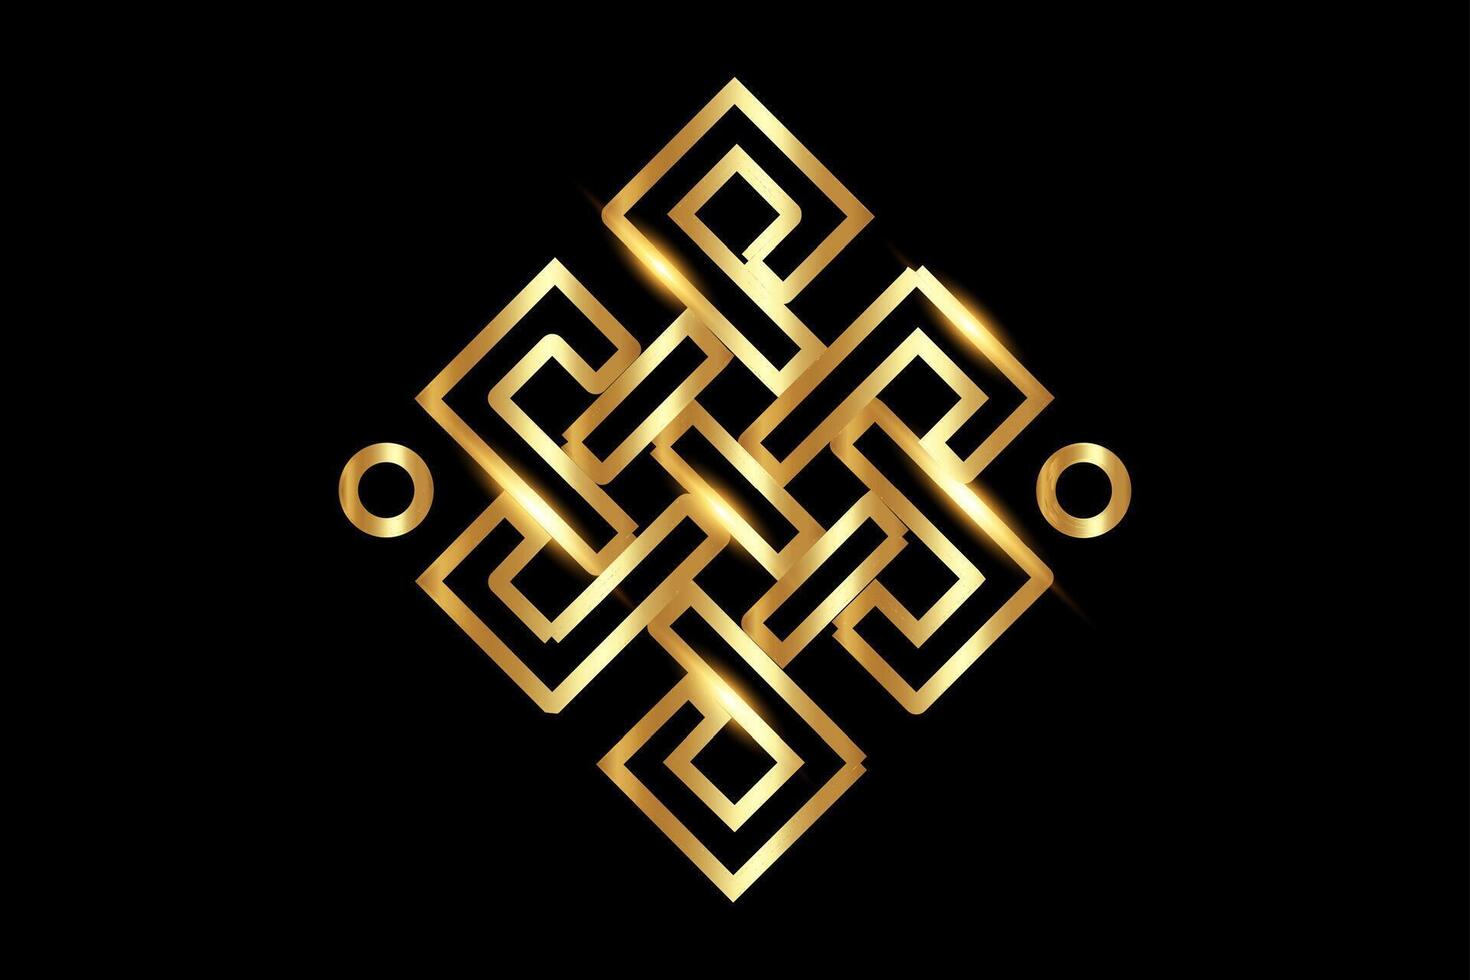 The endless knot or eternal knot. Gold Samsara icon. Guts of Buddha, The bowels of Buddha. Happiness node, symbol of inseparability and dependent origination of existence and all phenomena in Universe vector